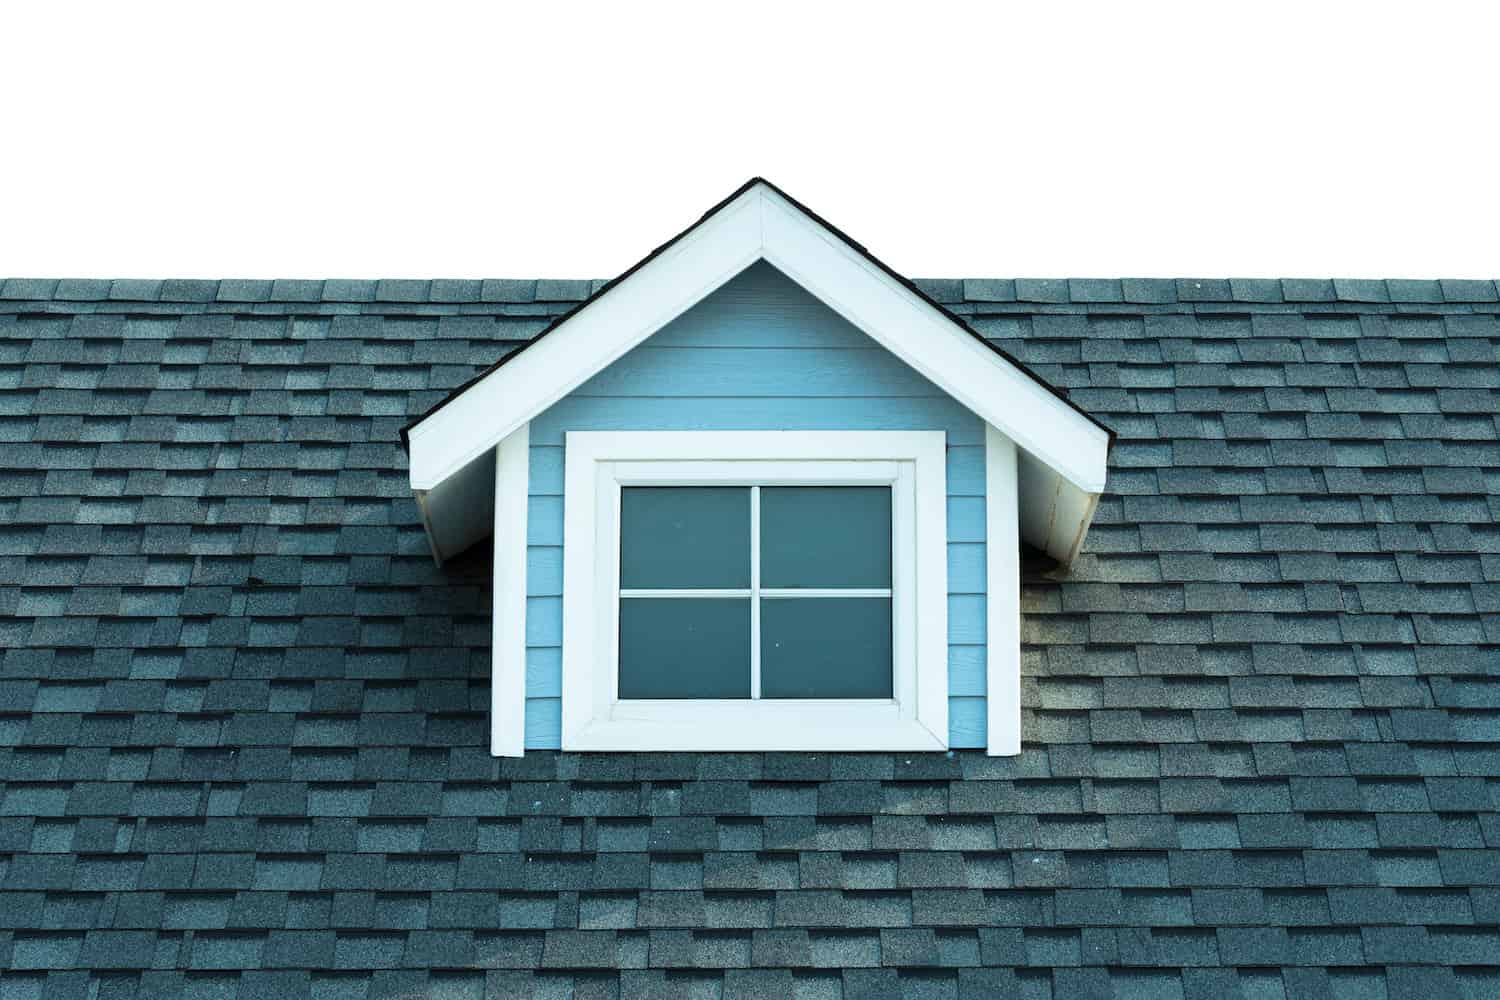 asphalt shingle roof with small pop out window